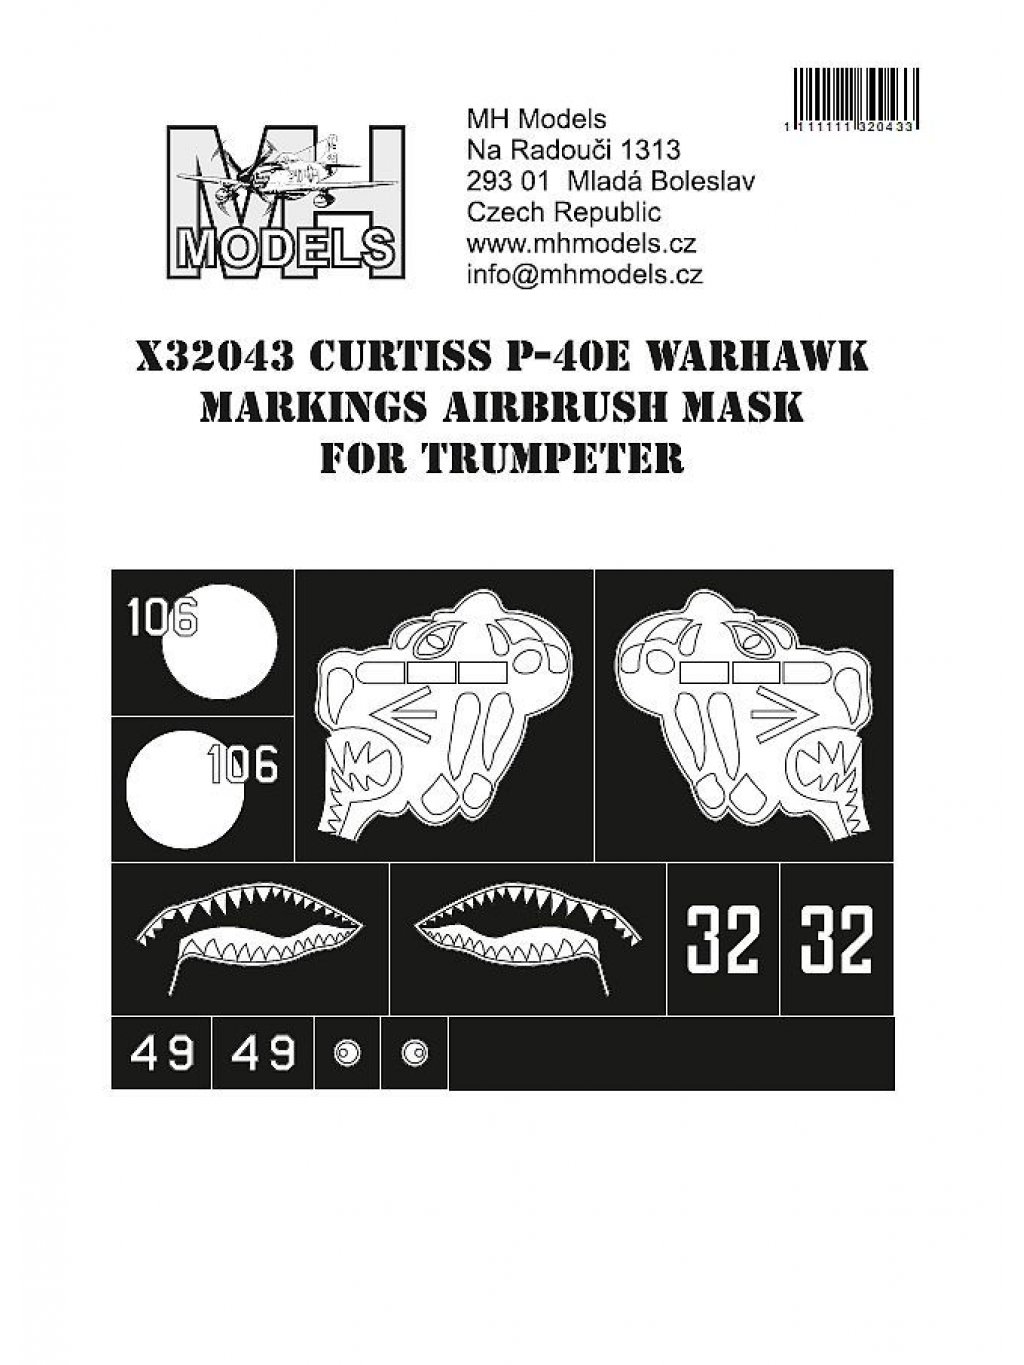 Curtiss P-40E Warhawk Markings Airbrush Mask for Trumpeter